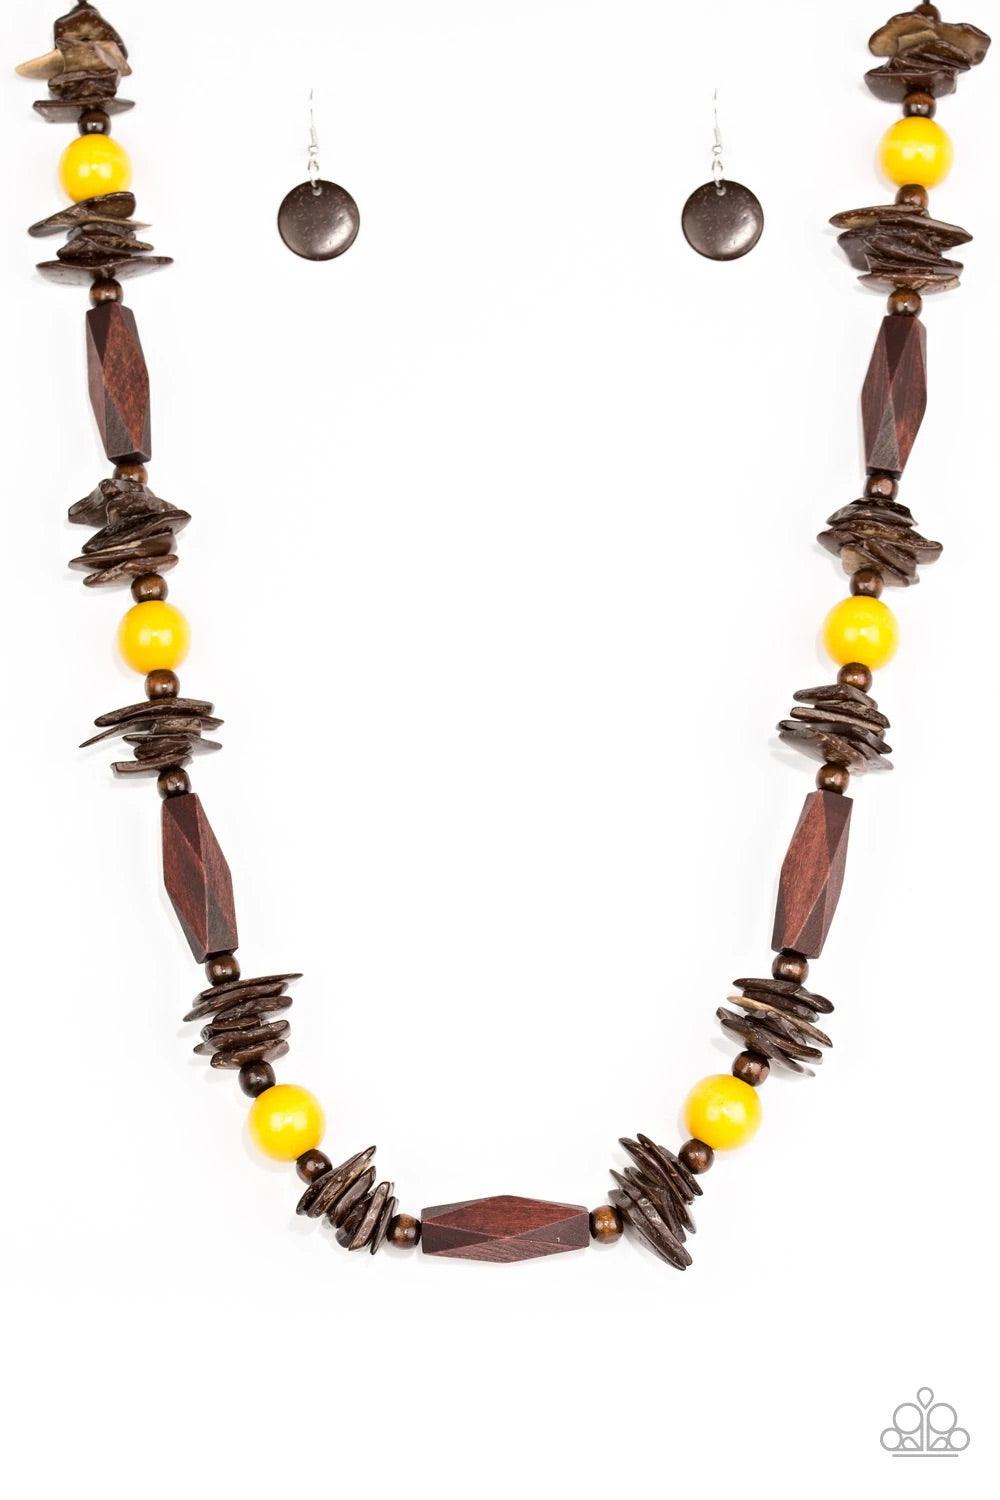 Paparazzi Accessories Cozumel Coast - Yellow Featuring round, faceted, and distressed finishes, mismatched brown wooden beads are threaded along shiny brown cording. Vivacious yellow wooden beads trickle between the earthy accents, adding a colorful finis